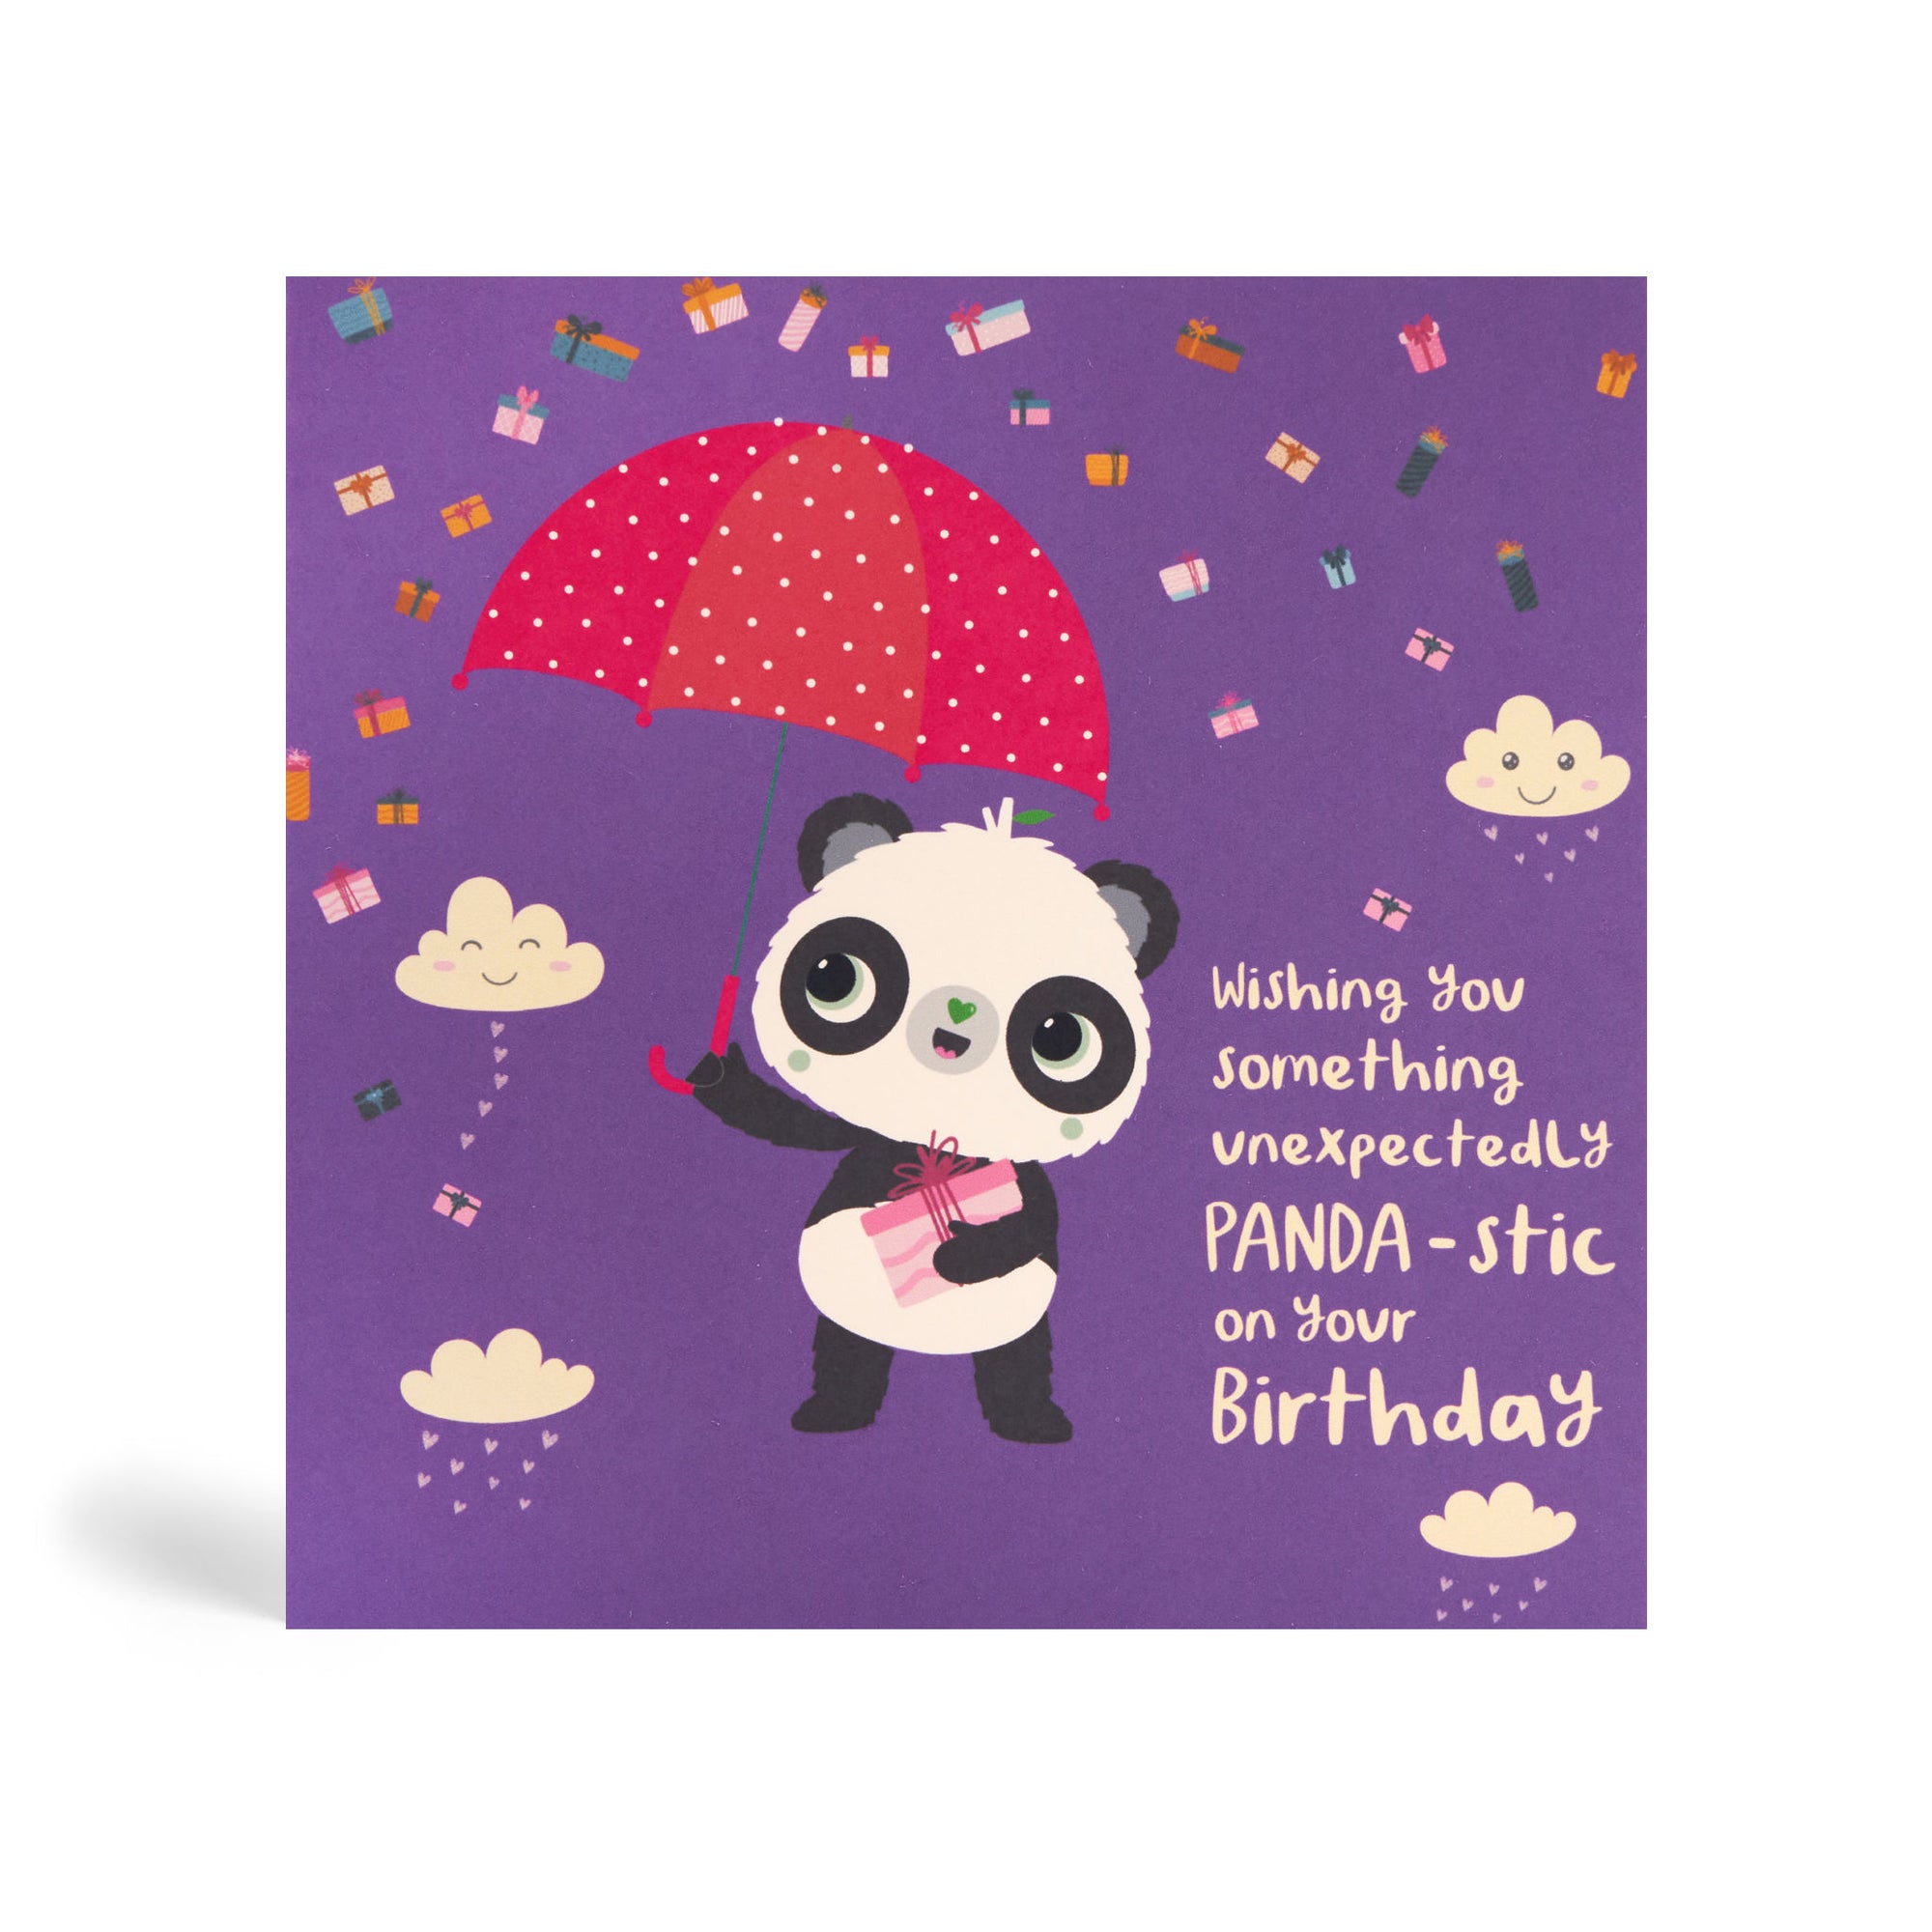 150mm square purple eco-friendly, tree free, birthday greeting card with Panda standing, holding a present and umbrella. In the background, there is images of clouds and raining presents. The card say, Wishing You Something Unexpectedly Panda-stic on your Birthday!